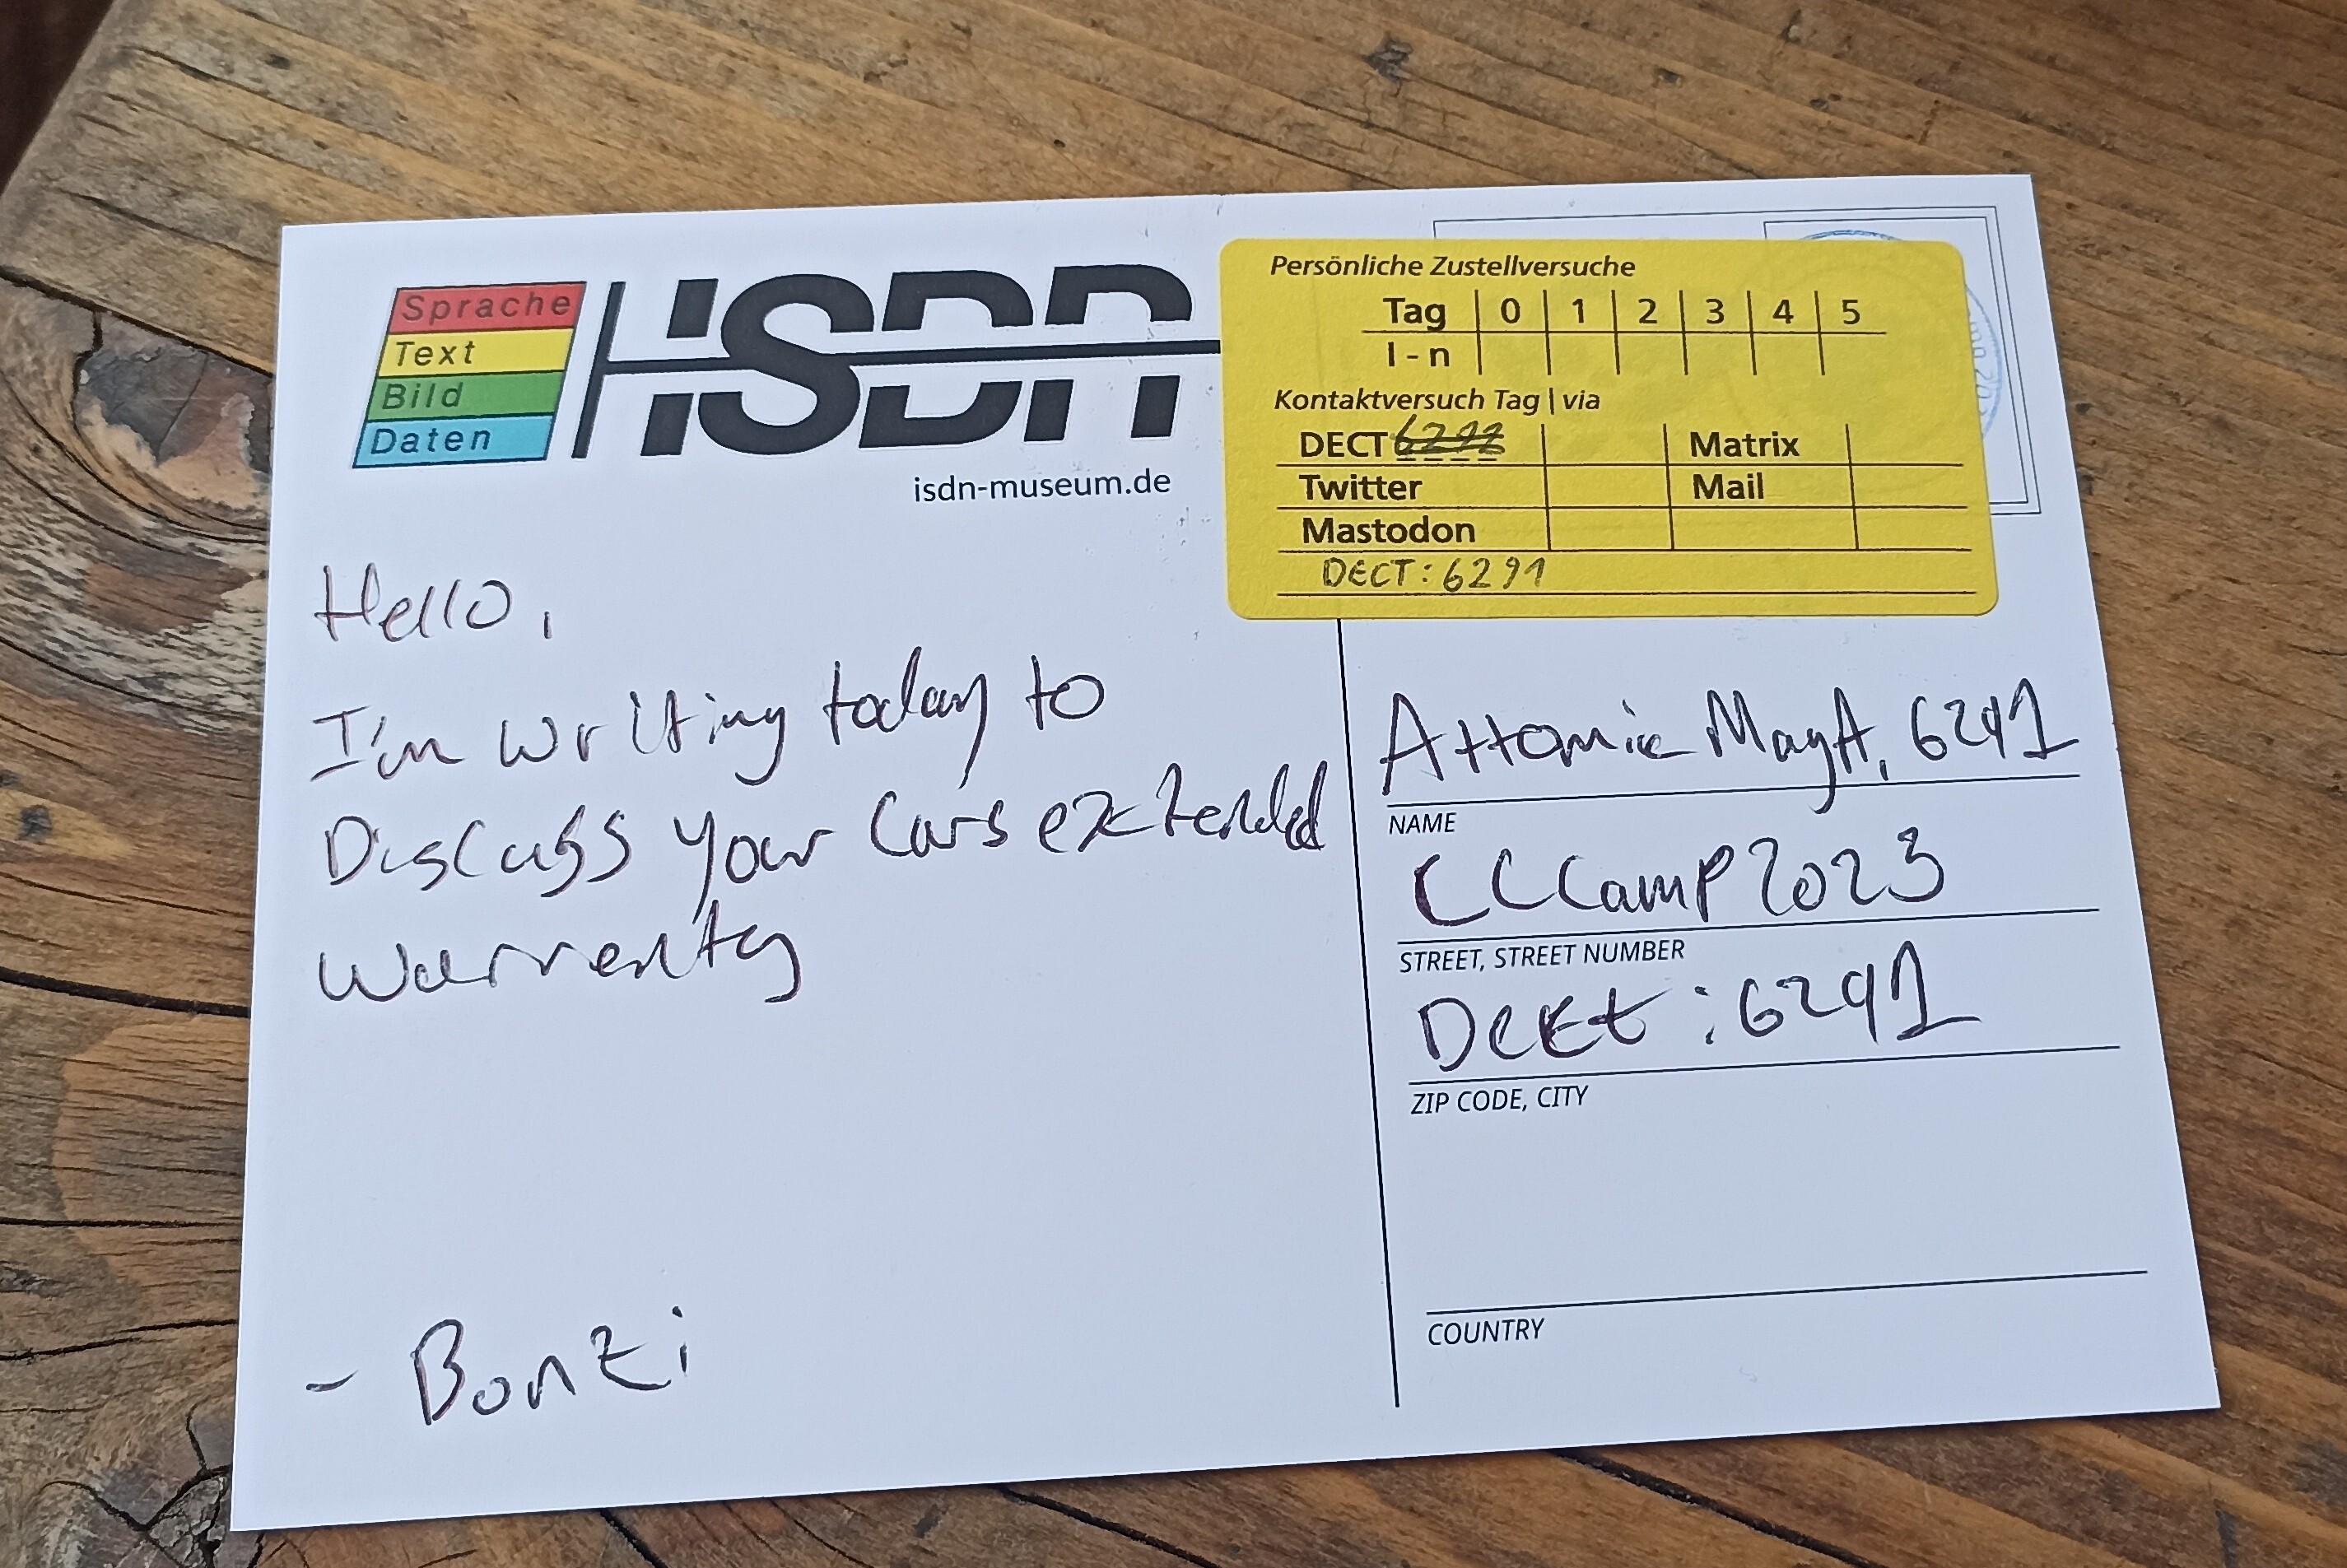 A postcard signed bonzi, saying 'Hello, I'm writing today to discuss your cars extended warranty'